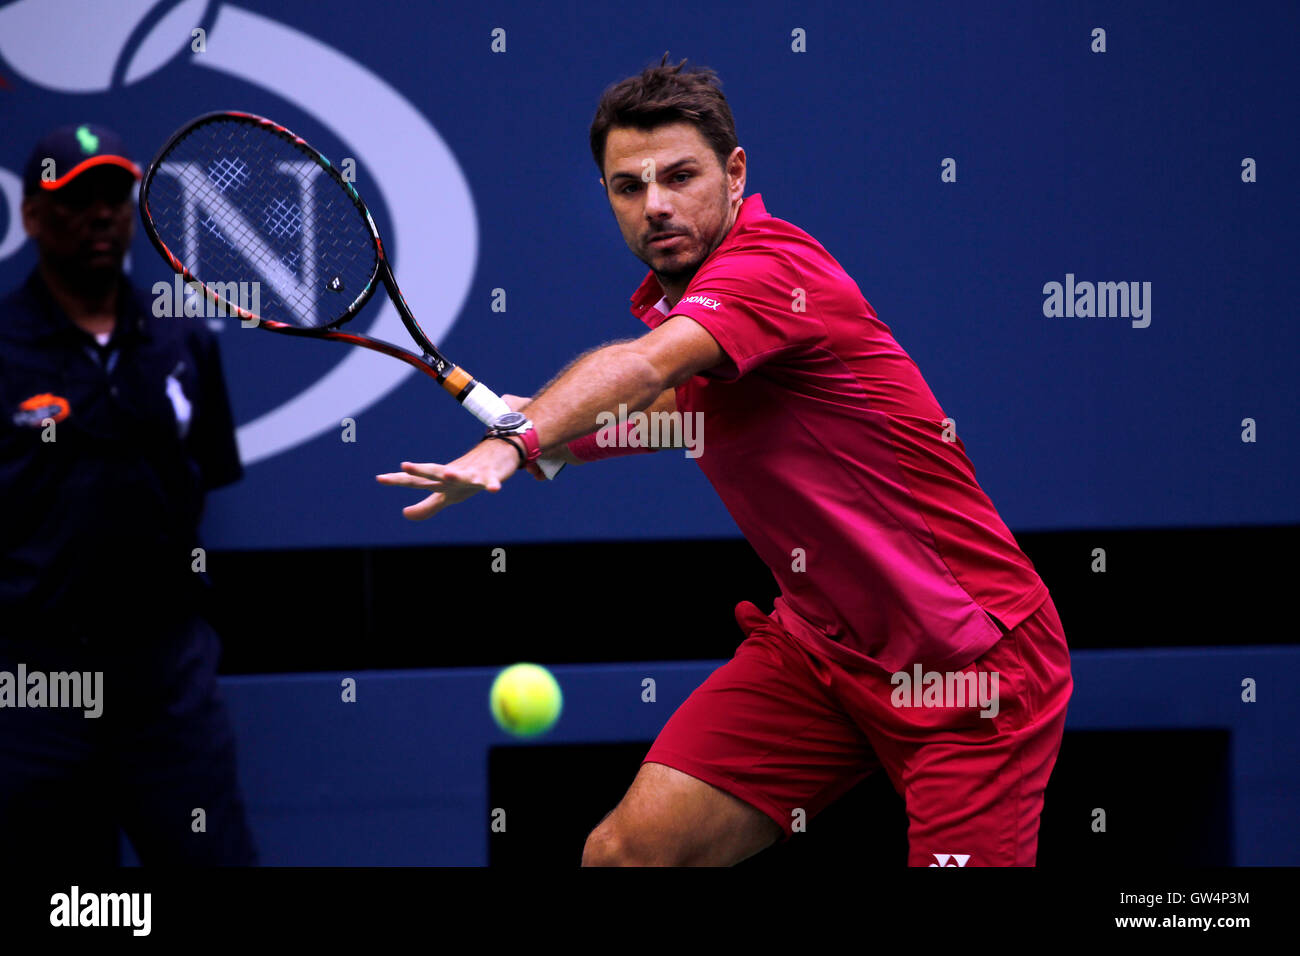 New York, United States. 11th Sep, 2016. Switzerland's Stan Warwinka during the United States Open Tennis Championships Final against Novak Djokovic at Flushing Meadows, New York on Sunday, September 11th. Credit:  Adam Stoltman/Alamy Live News Stock Photo